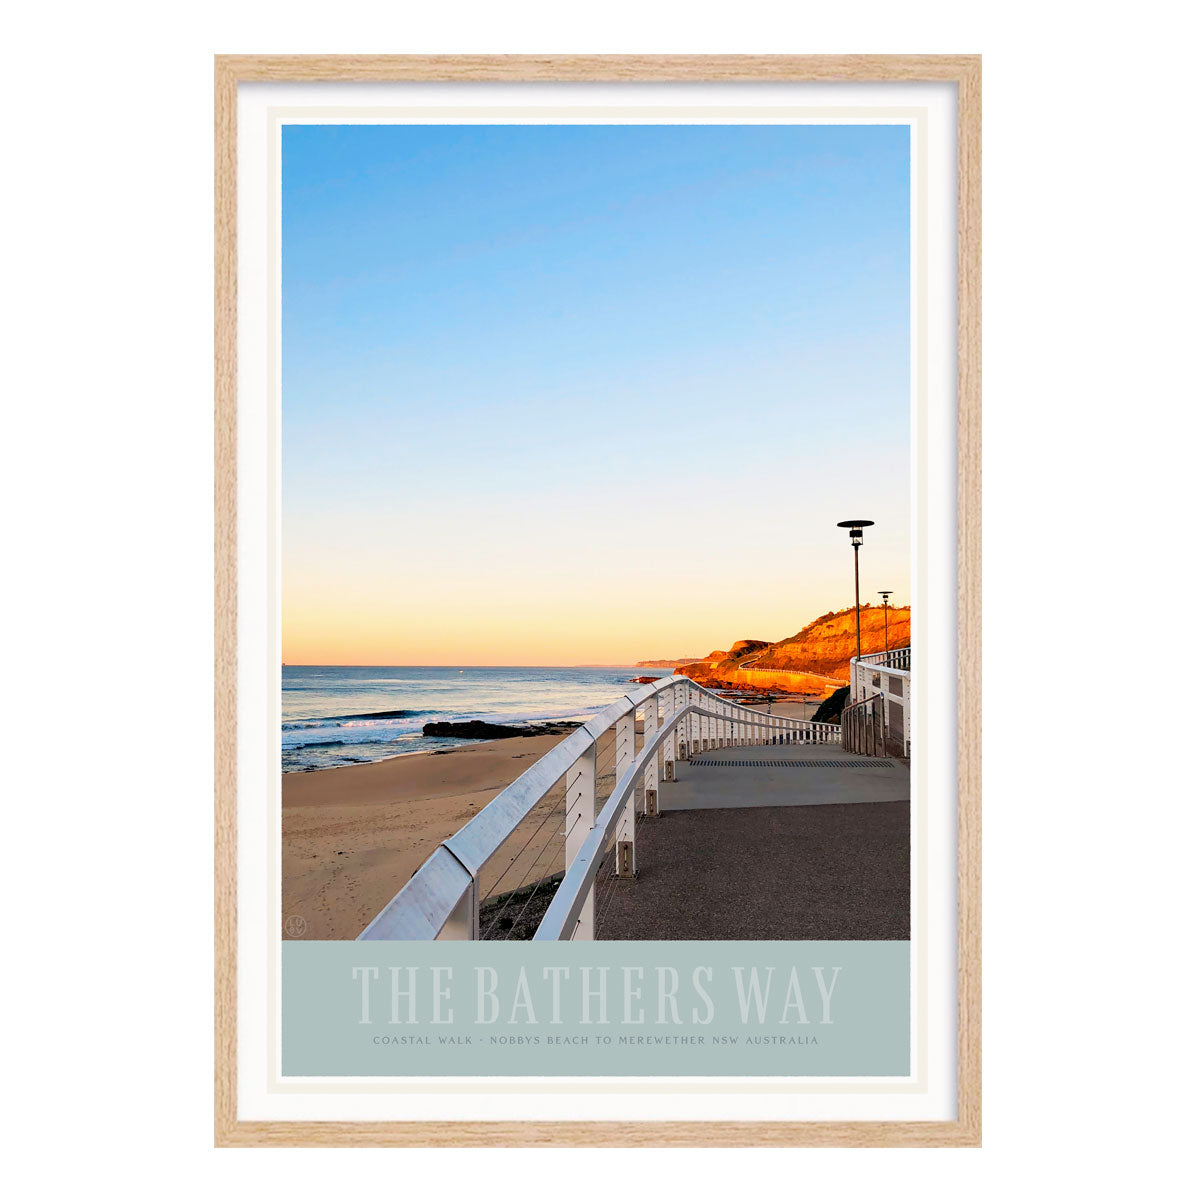 The Bathers Way Newcastle vintage retro poster print in oak frame from Places We Luvpr